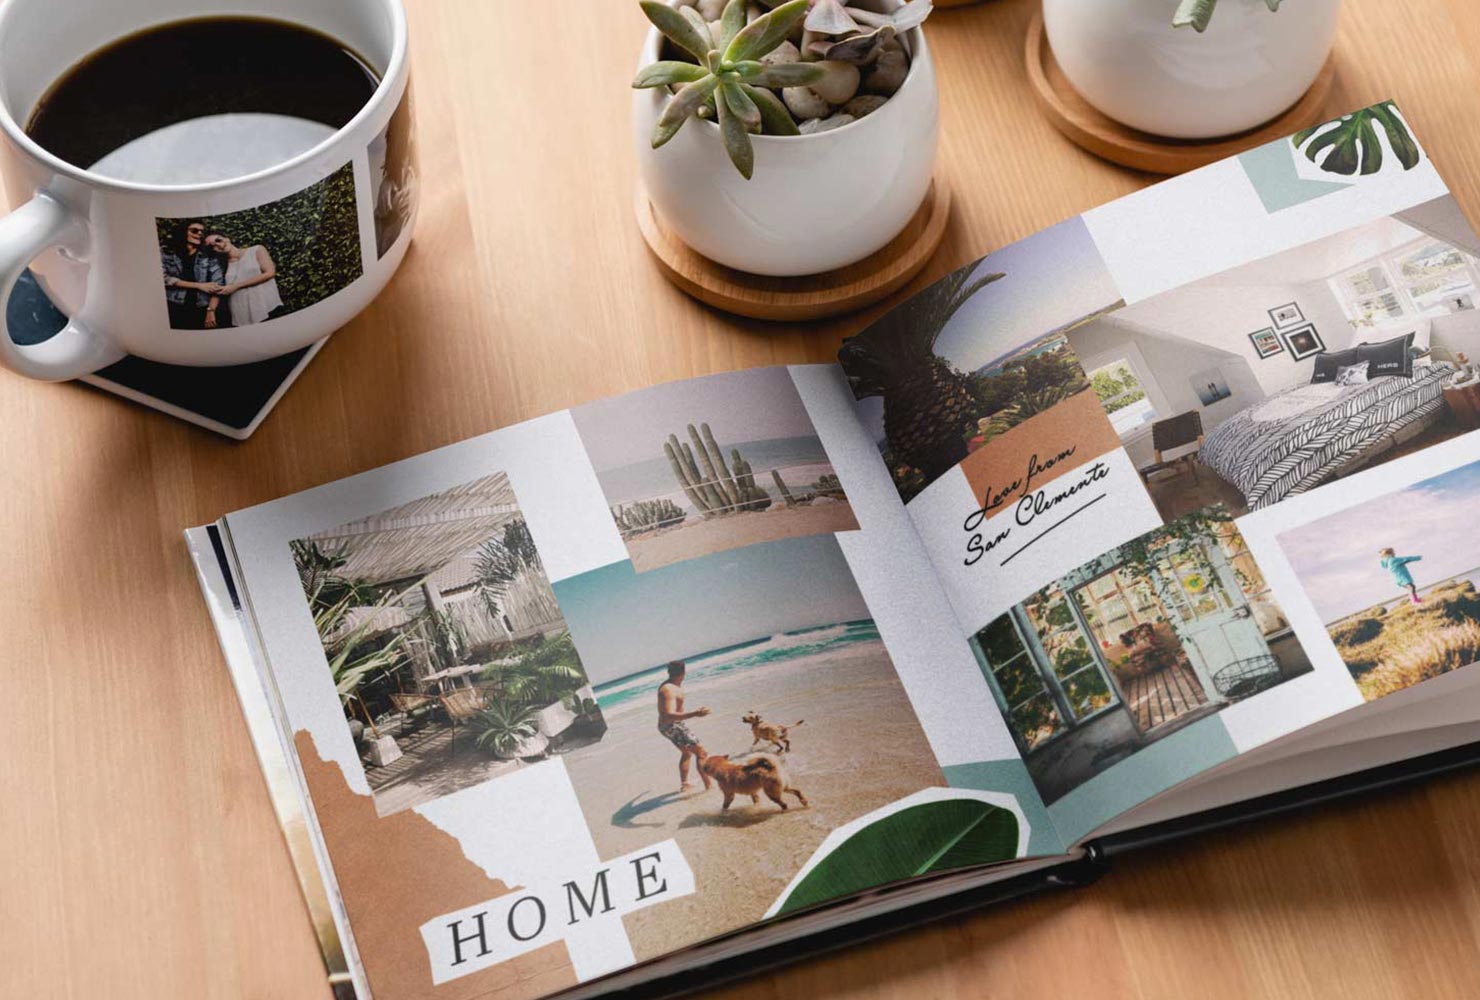 create your own collage photo book to use as a coffee table photo book